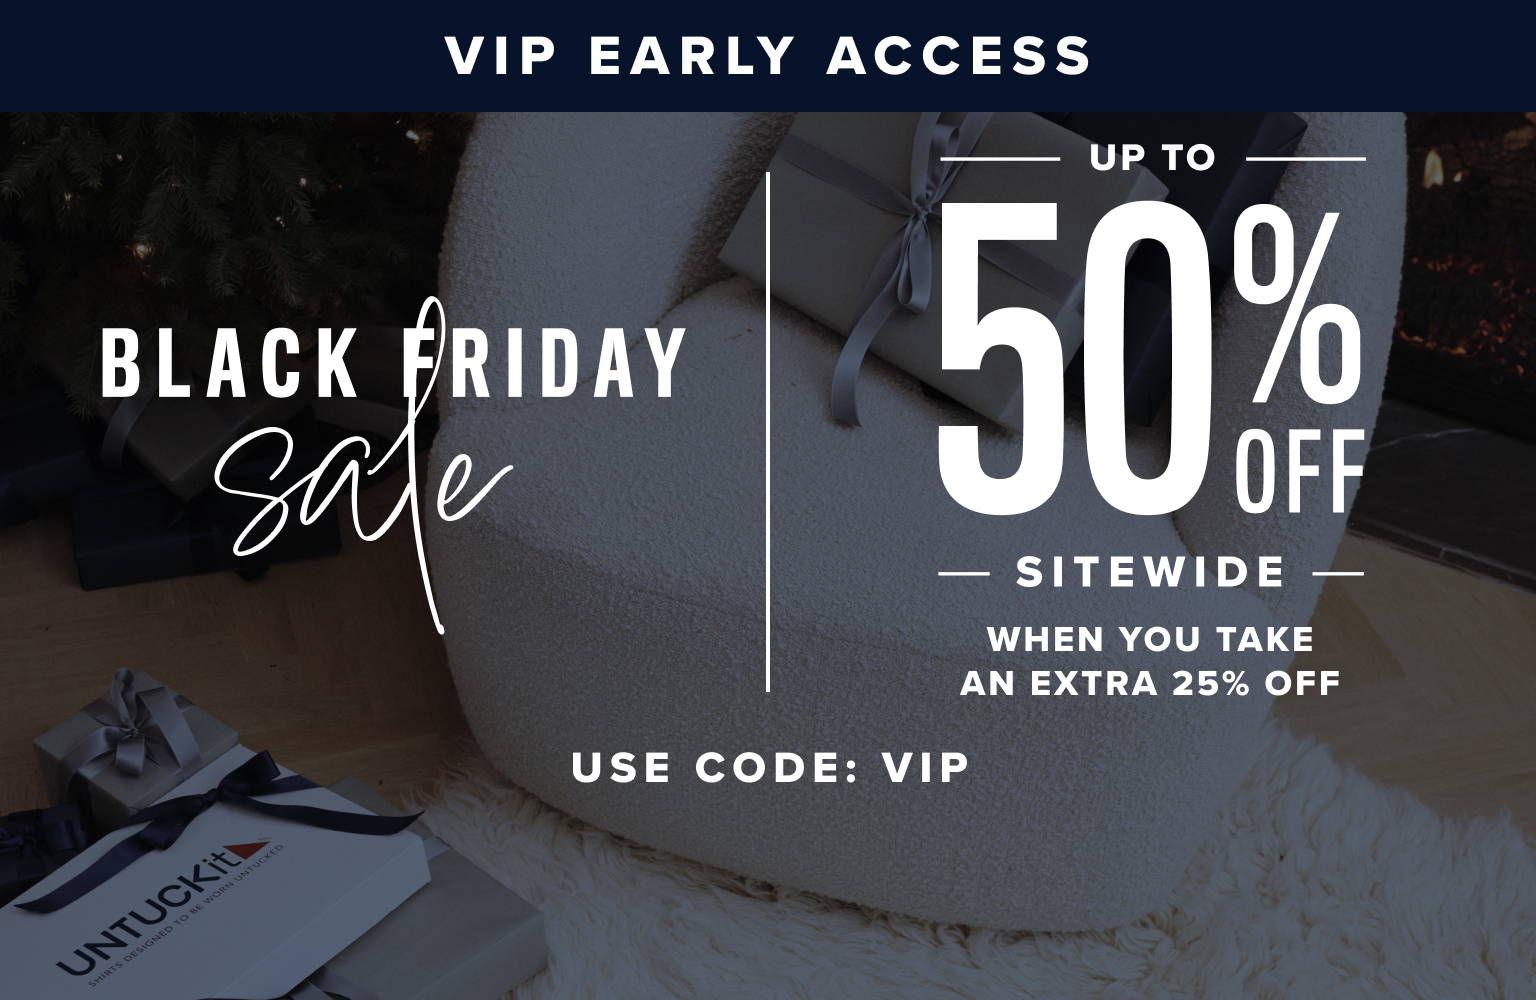 VIP Early Access. Black Friday Sale. Up to 50% Off Sitewide when you take an extra 25% Off. Use code: VIP